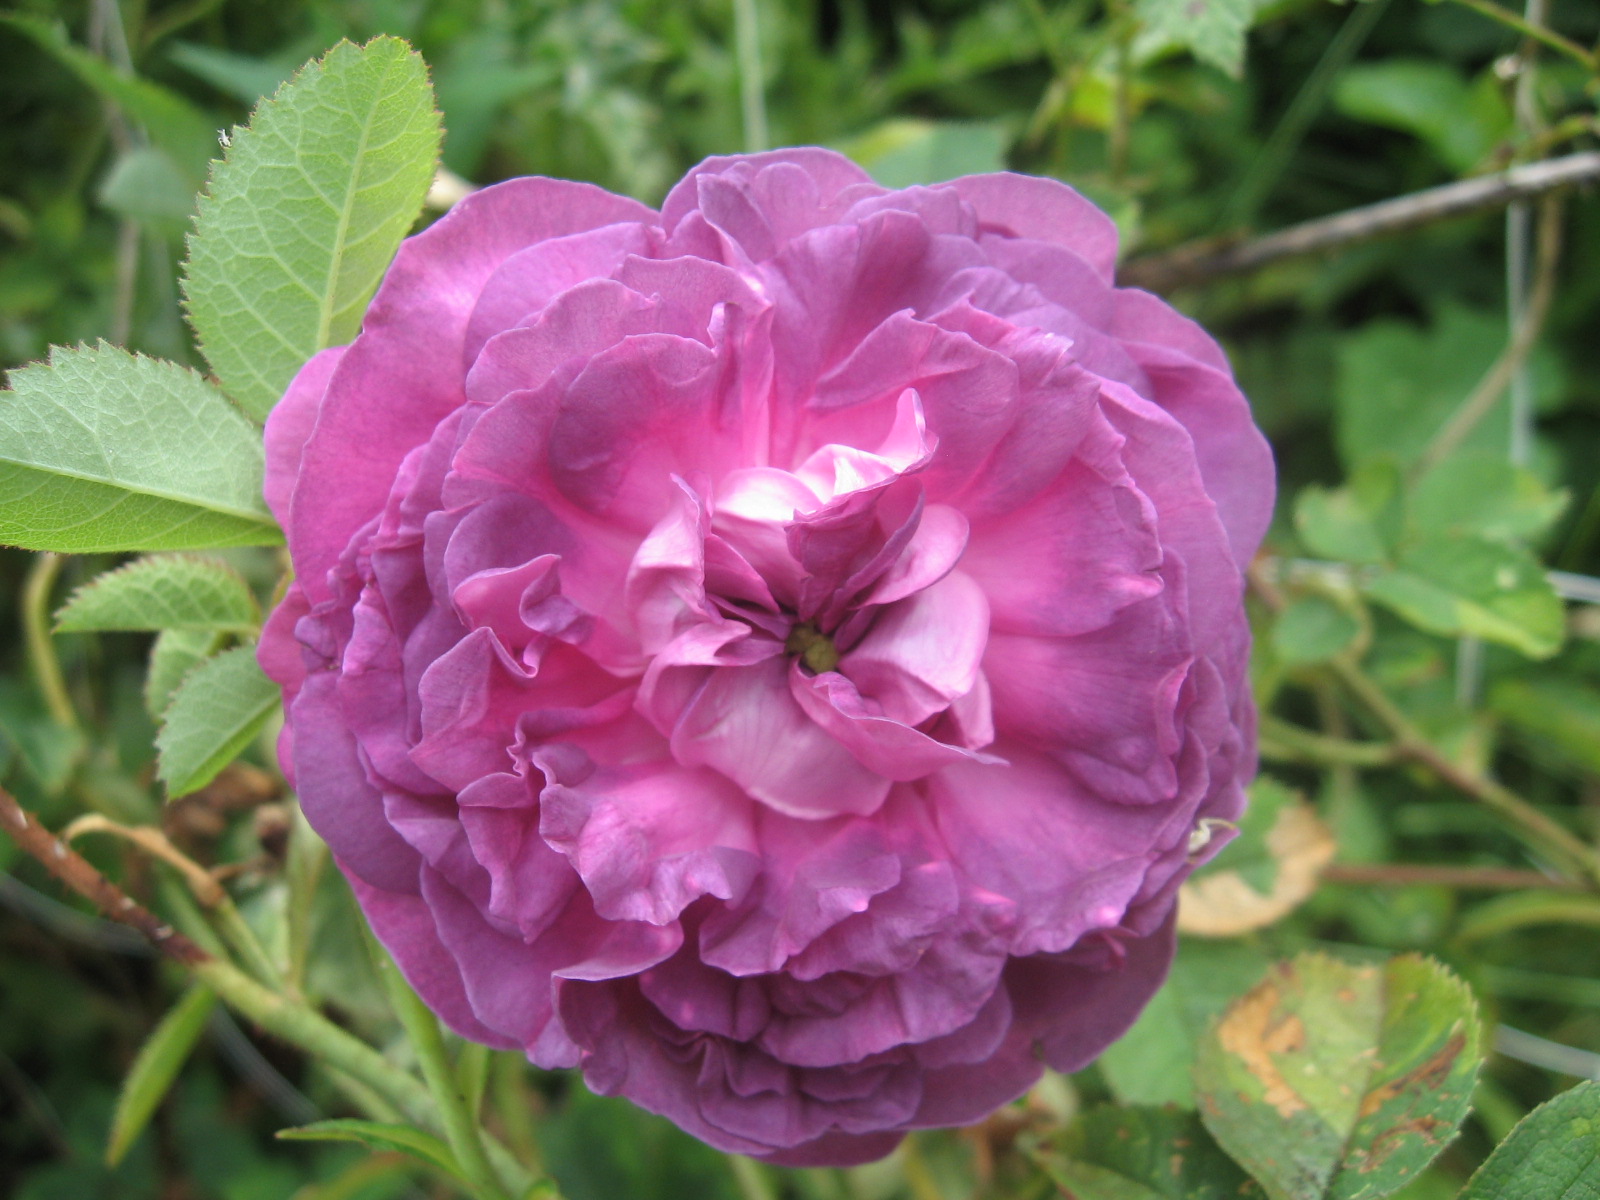 Weeding on the Wild Side: Those Magnificent Once-Blooming Roses and ...